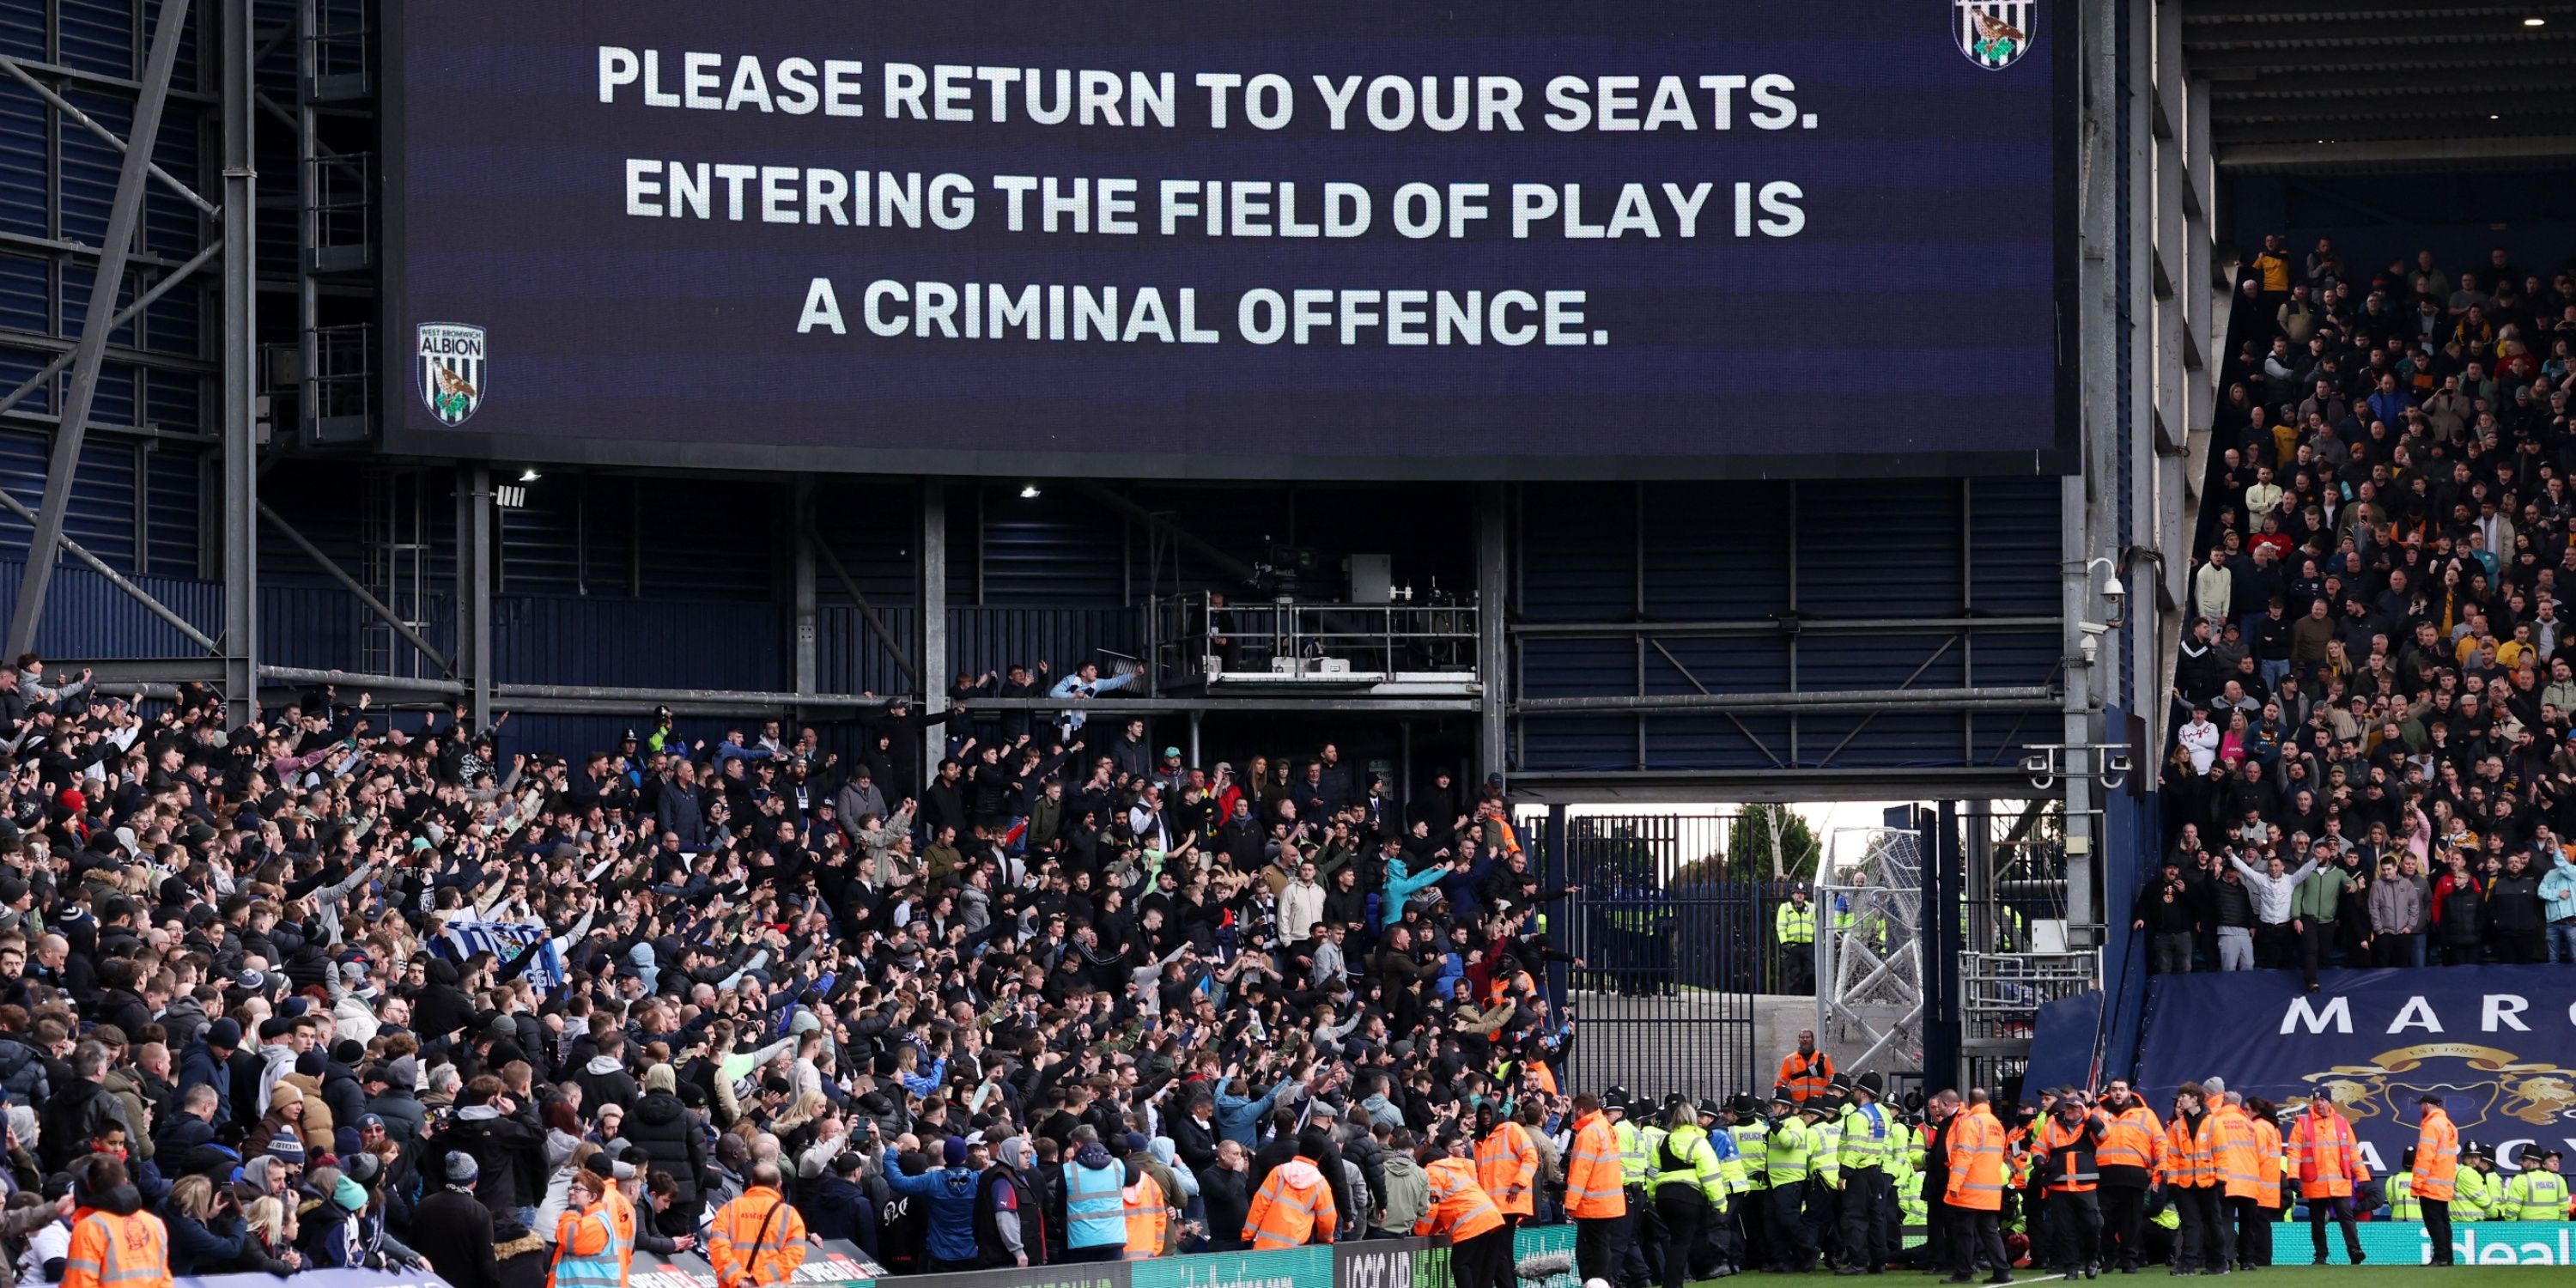 West Brom vs Wolves was suspended following crowd trouble